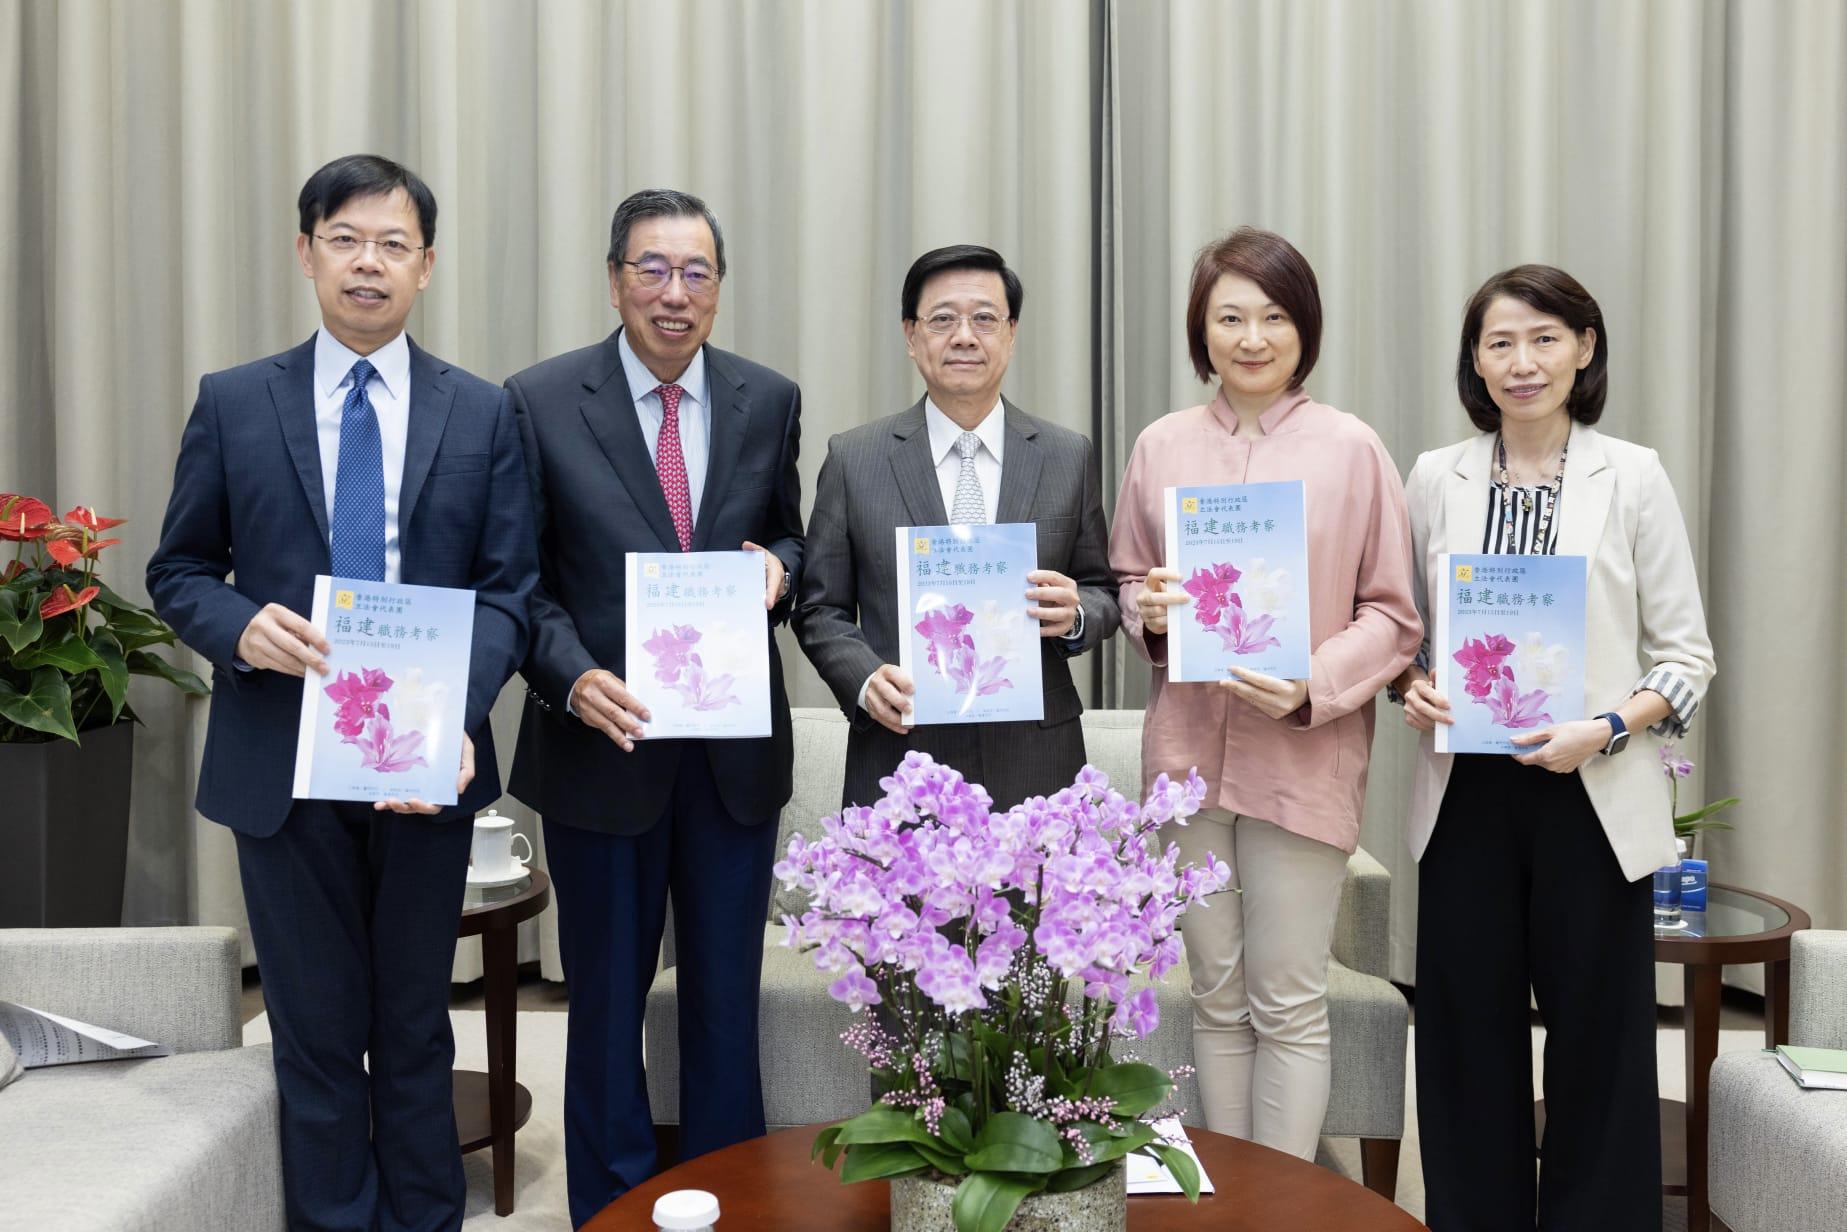 The Legislative Council delegation releases the report on the study visit to Fujian today (October 10). Photo shows the President of the Legislative Council, Mr Andrew Leung (second left); the Chairman of the House Committee, Ms Starry Lee (second right); and the Chairman of the Finance Committee, Mr Chan Chun-ying (first left), submitting the report on the study visit to Fujian to the Chief Executive, Mr John Lee (centre). First right is the Director of the Chief Executive's Office, Ms Carol Yip.